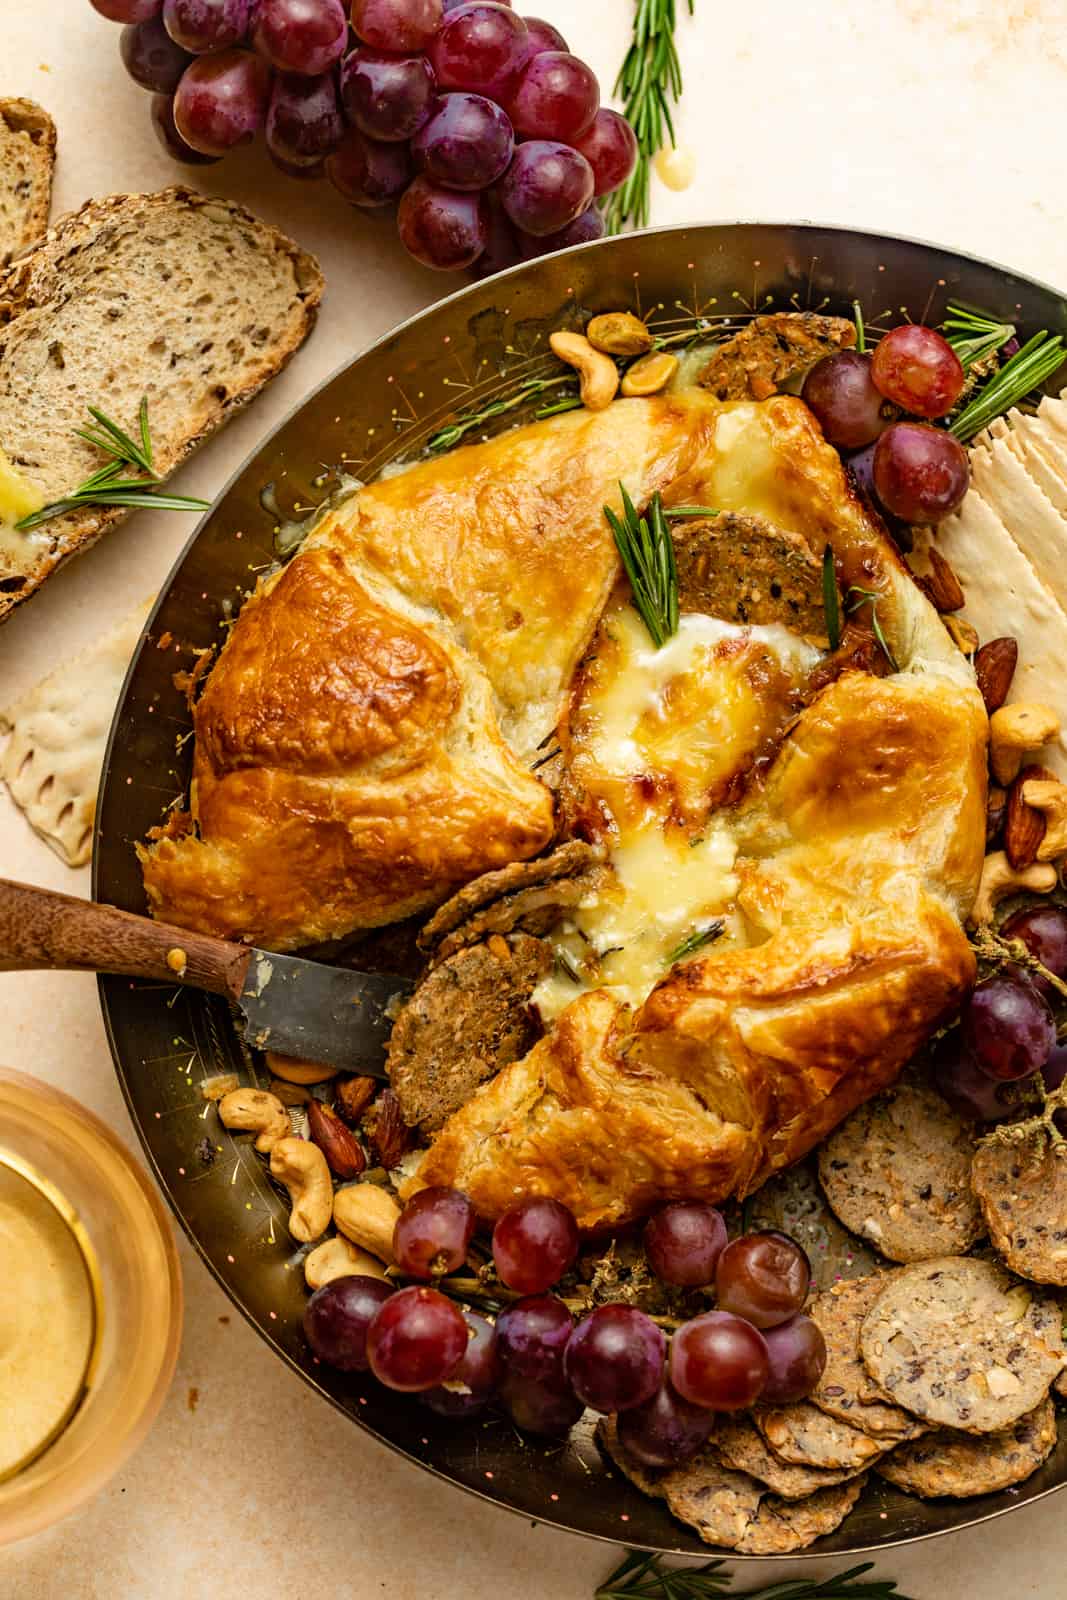 baked brie in puff pastry on a gold plate with grapes and crackers.